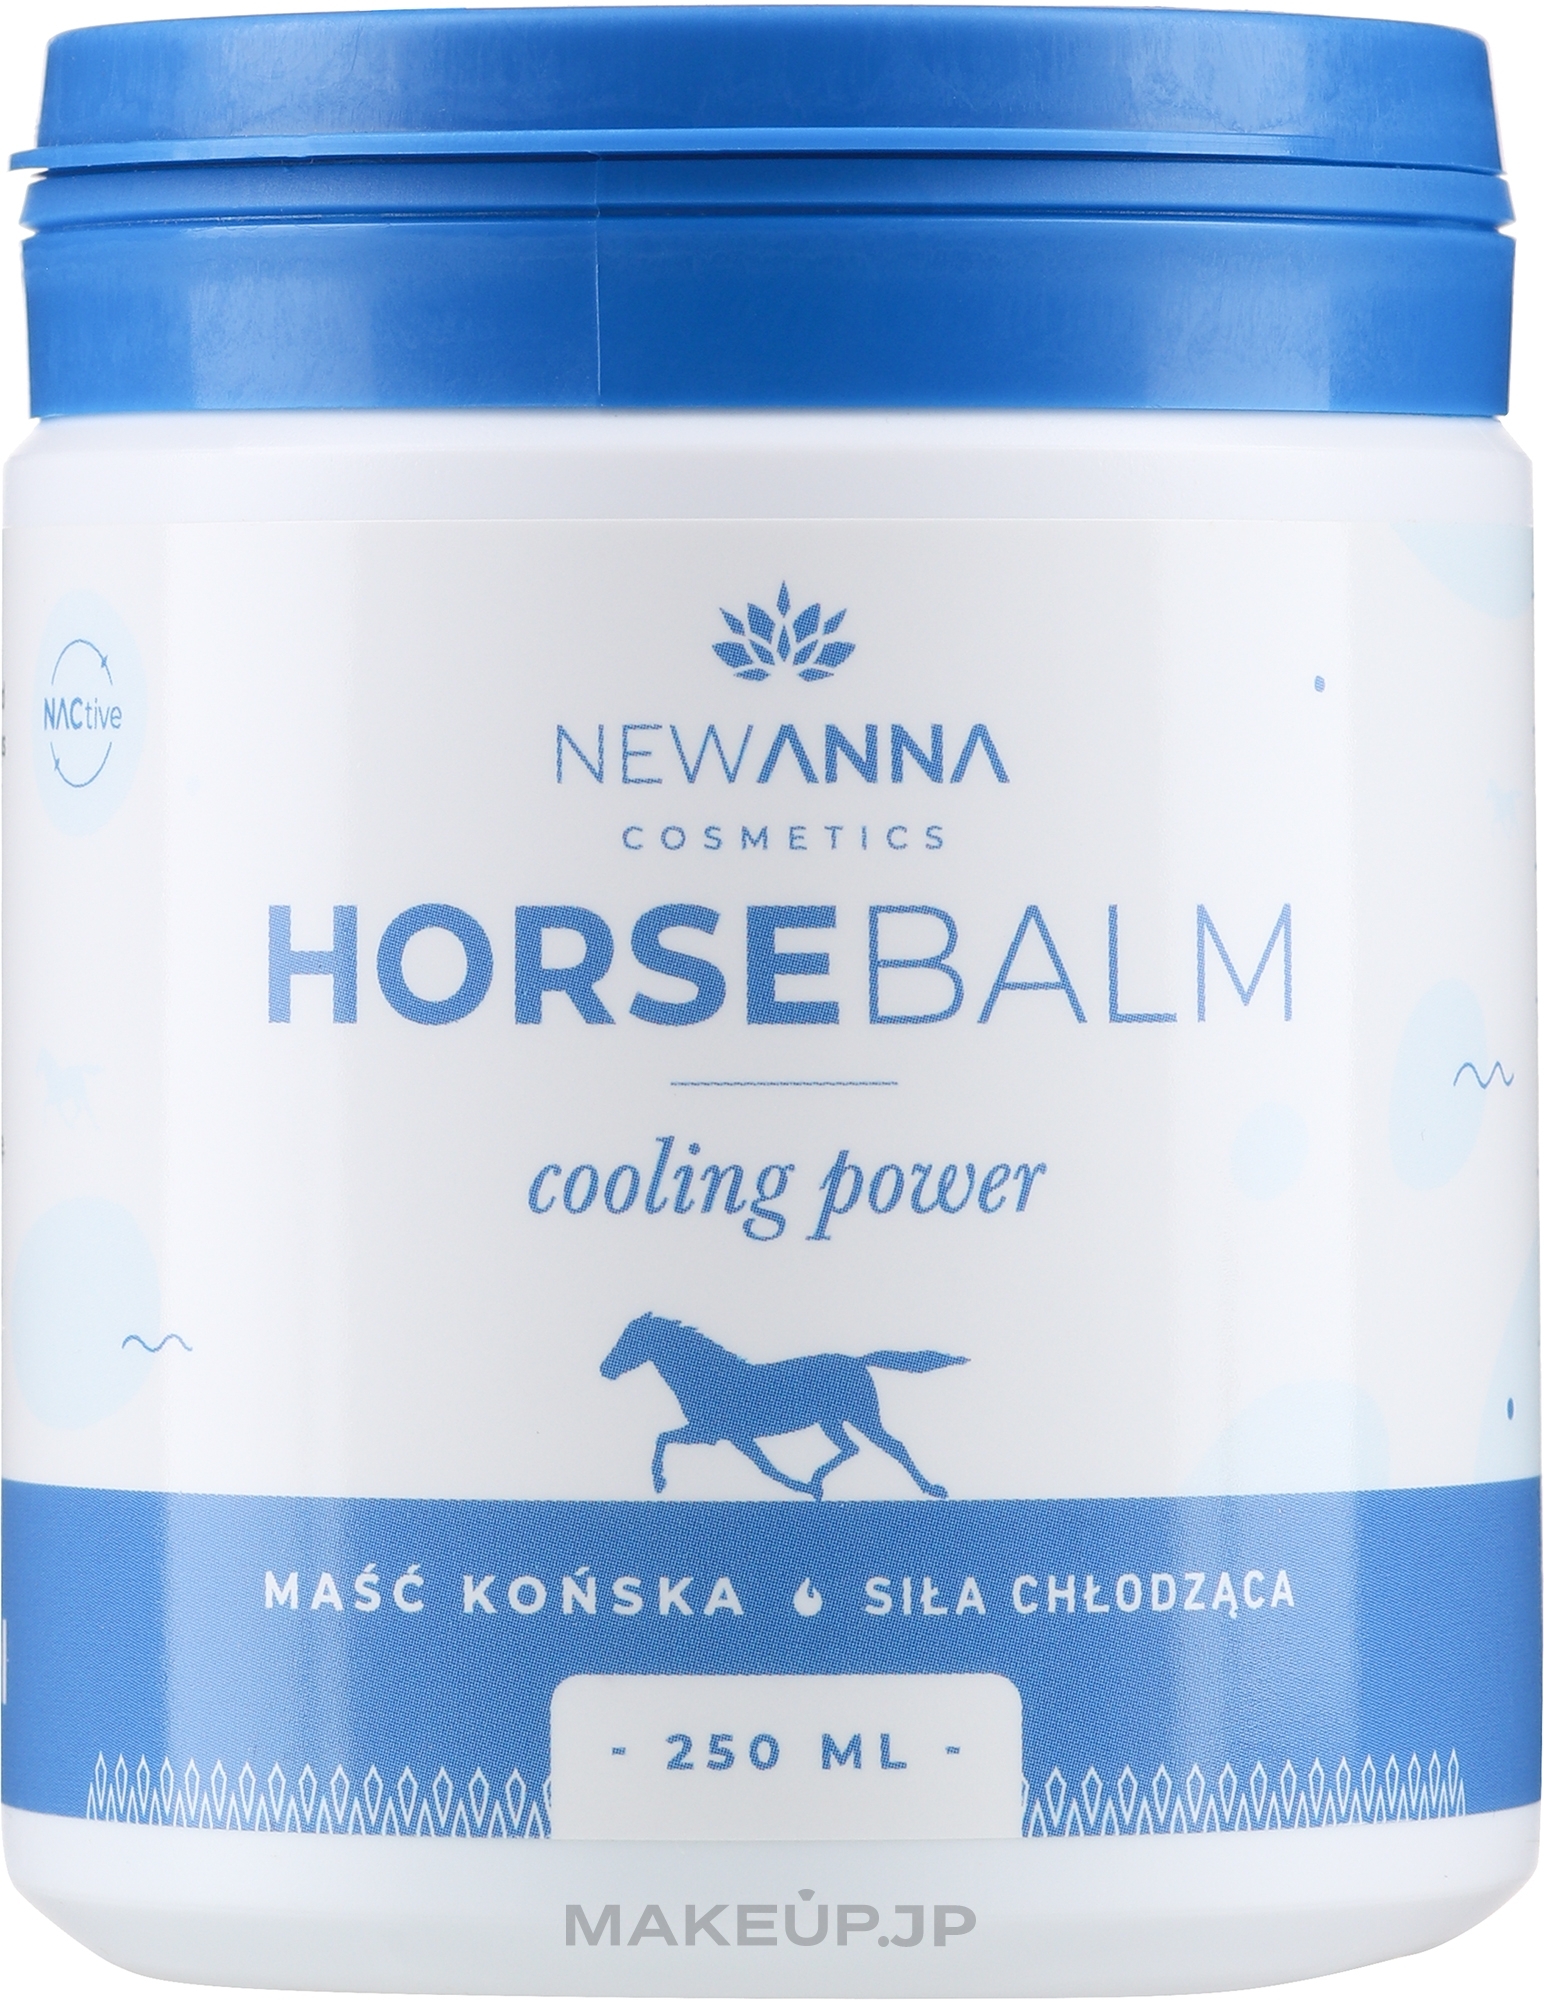 Cooling Body Balm 'Horse Force' - New Anna Cosmetics Horse Balm Cooling Power — photo 250 ml